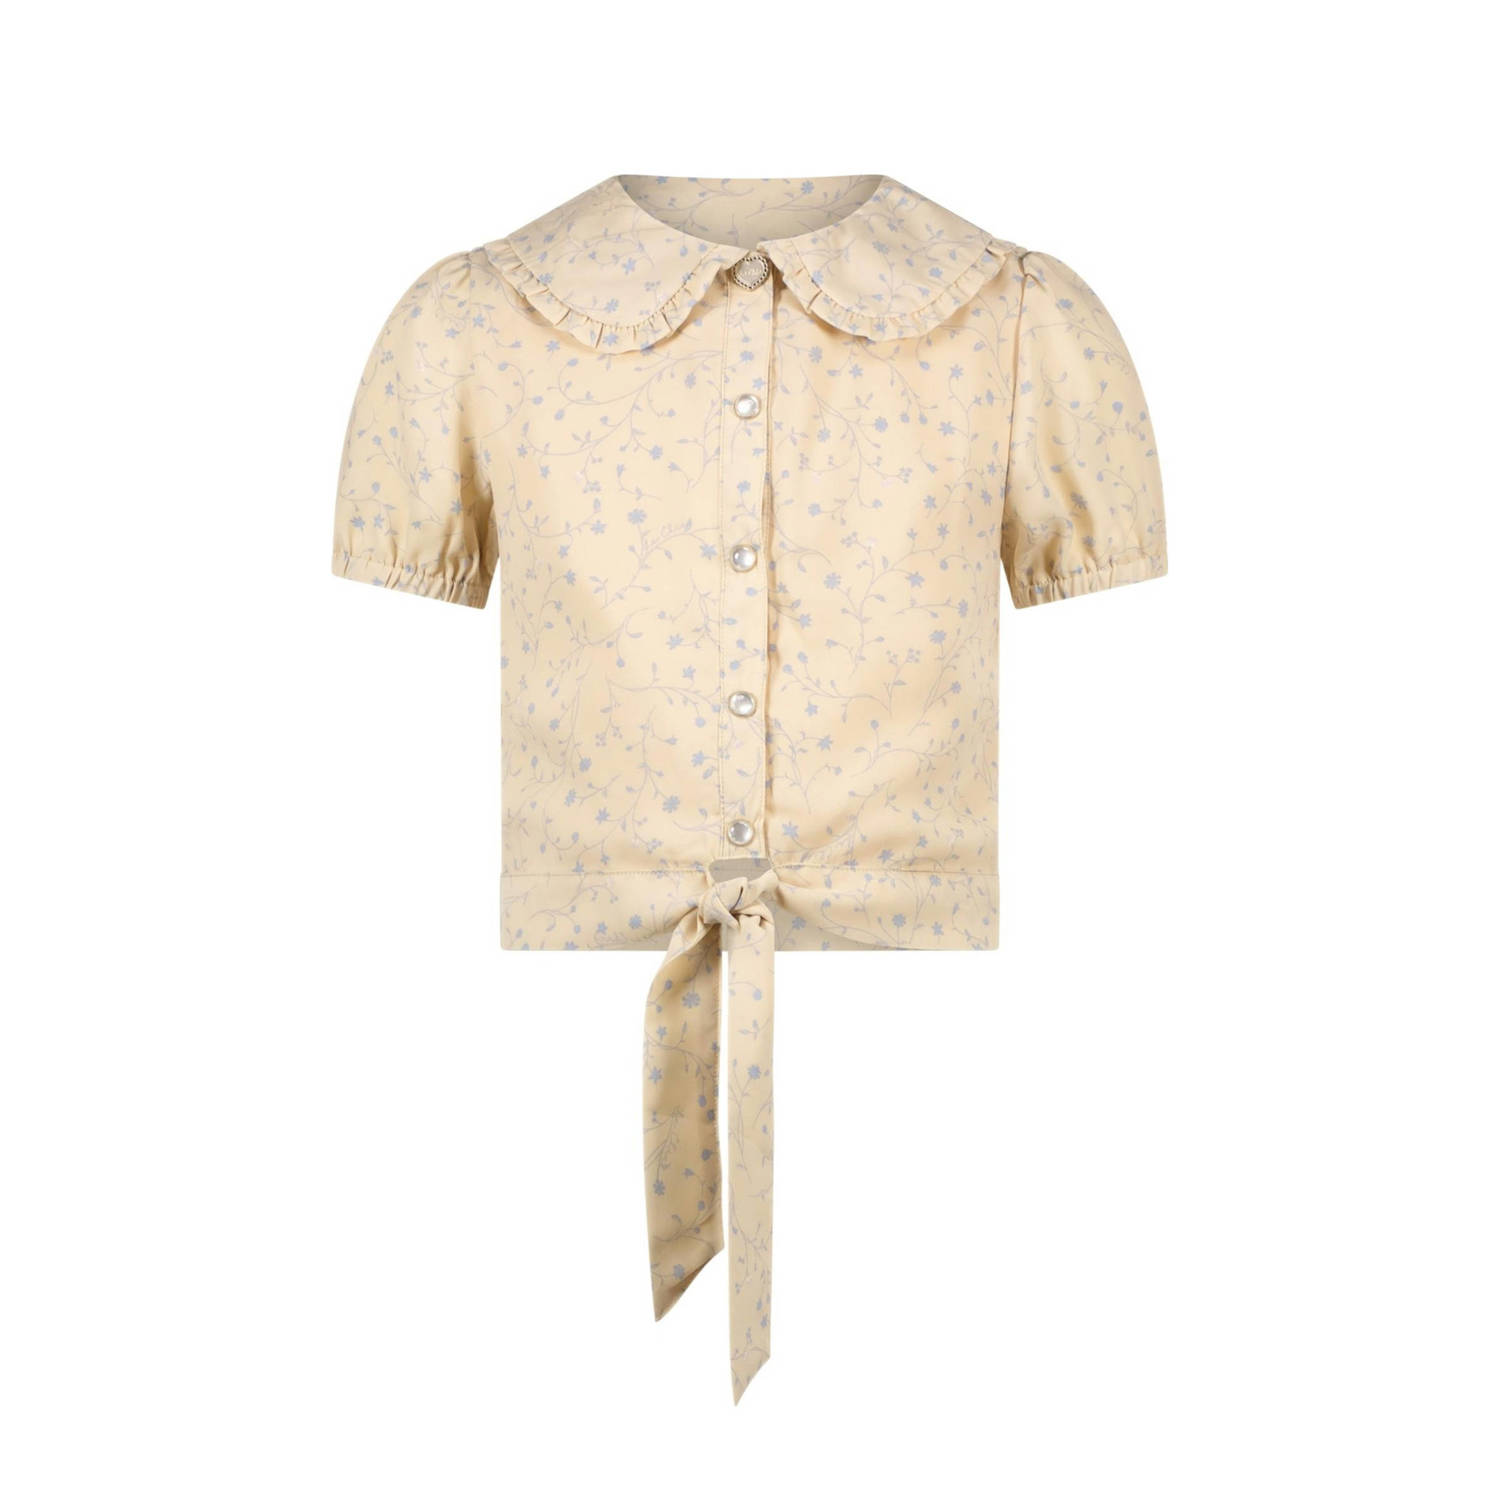 Le Chic blouse EDWY met all over print beige Meisjes Gerecycled polyester Peter Pan-kraag 104